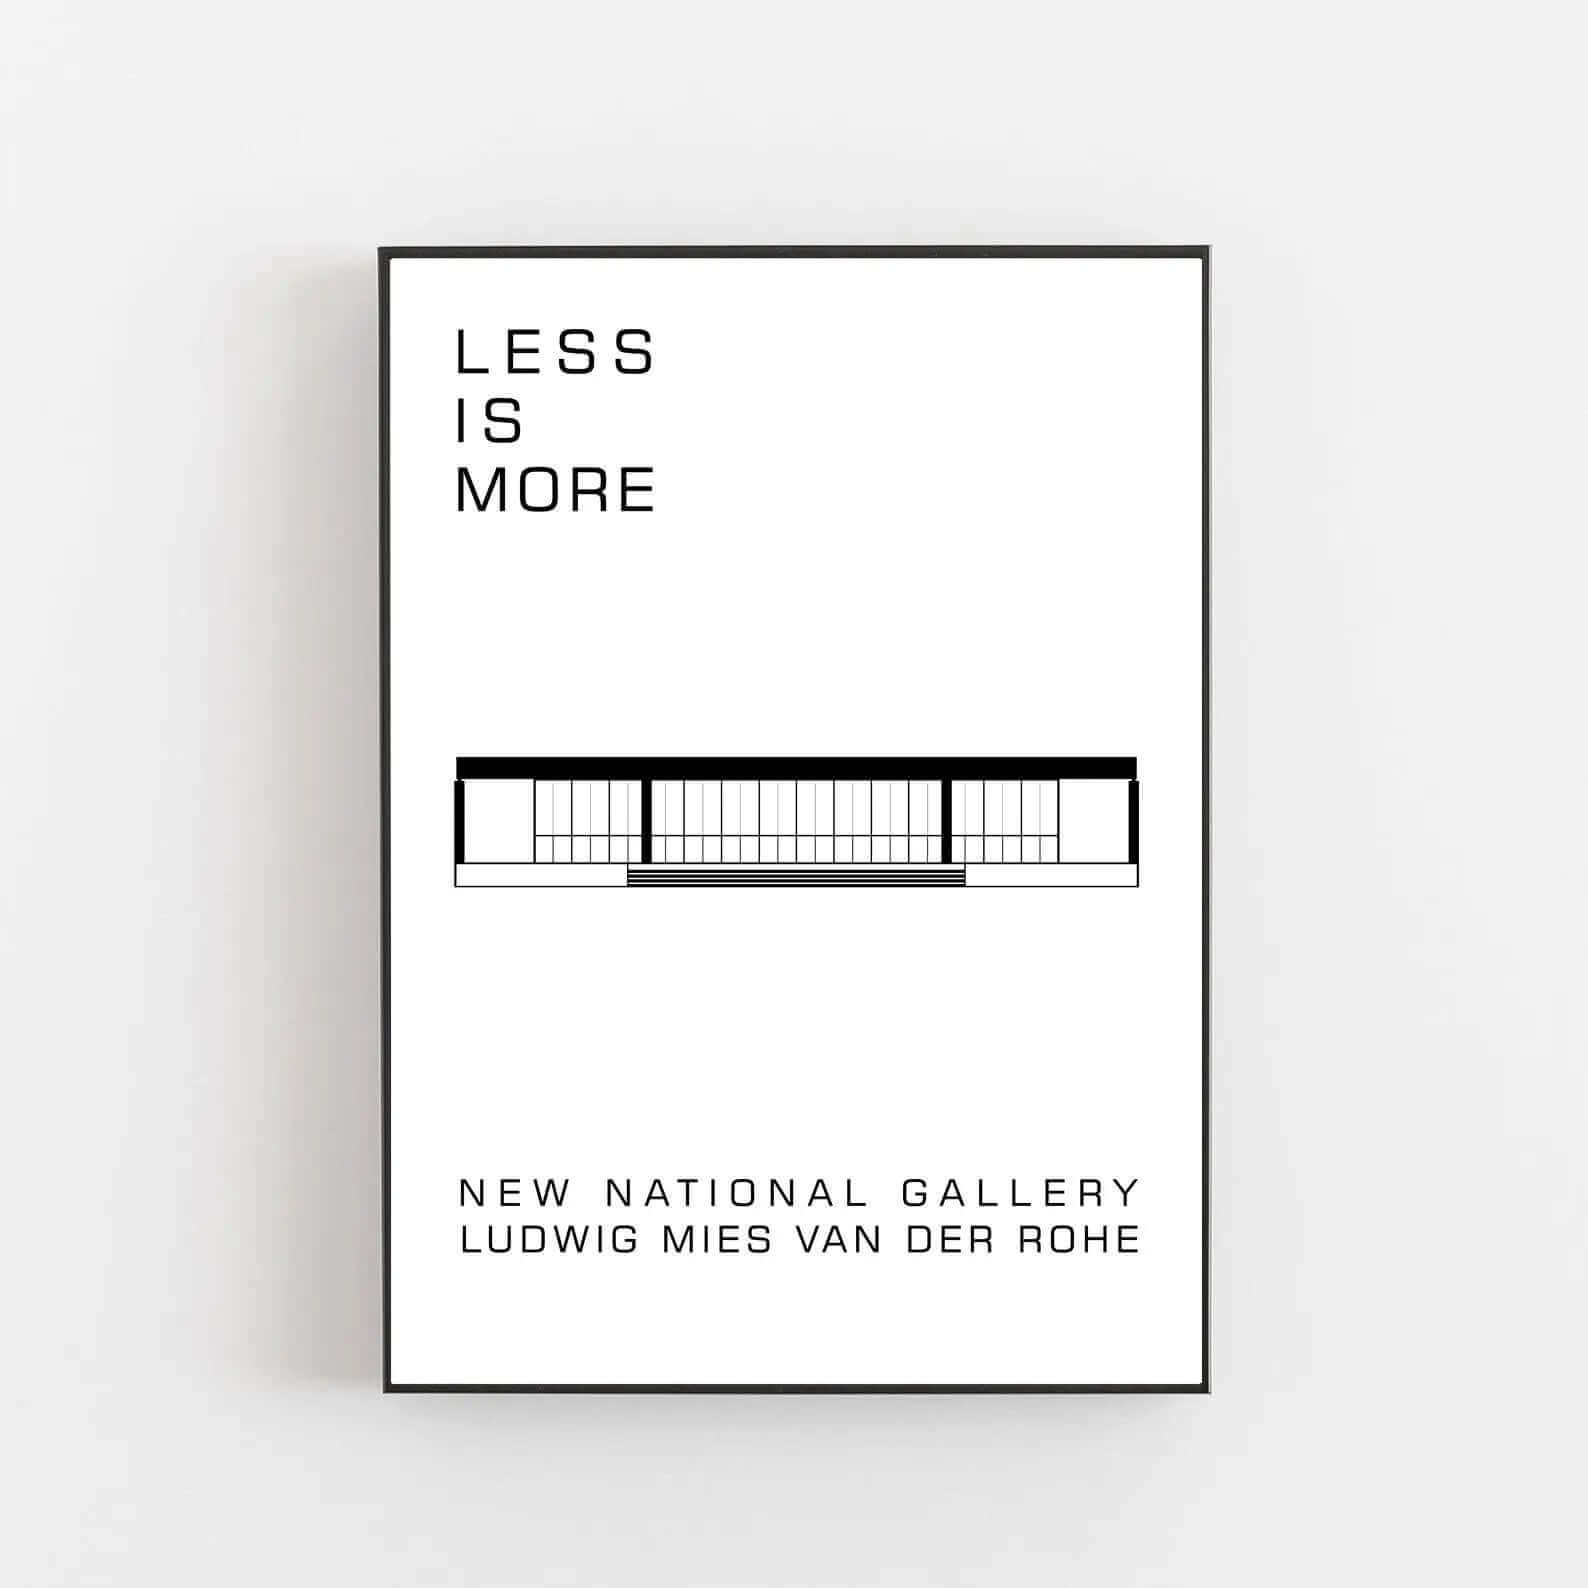 You will find Less is More Mies Van Der Rohe Prints, £31.0 on www.nauradika.com in our collection: Posters, Prints, & Visual Artwork